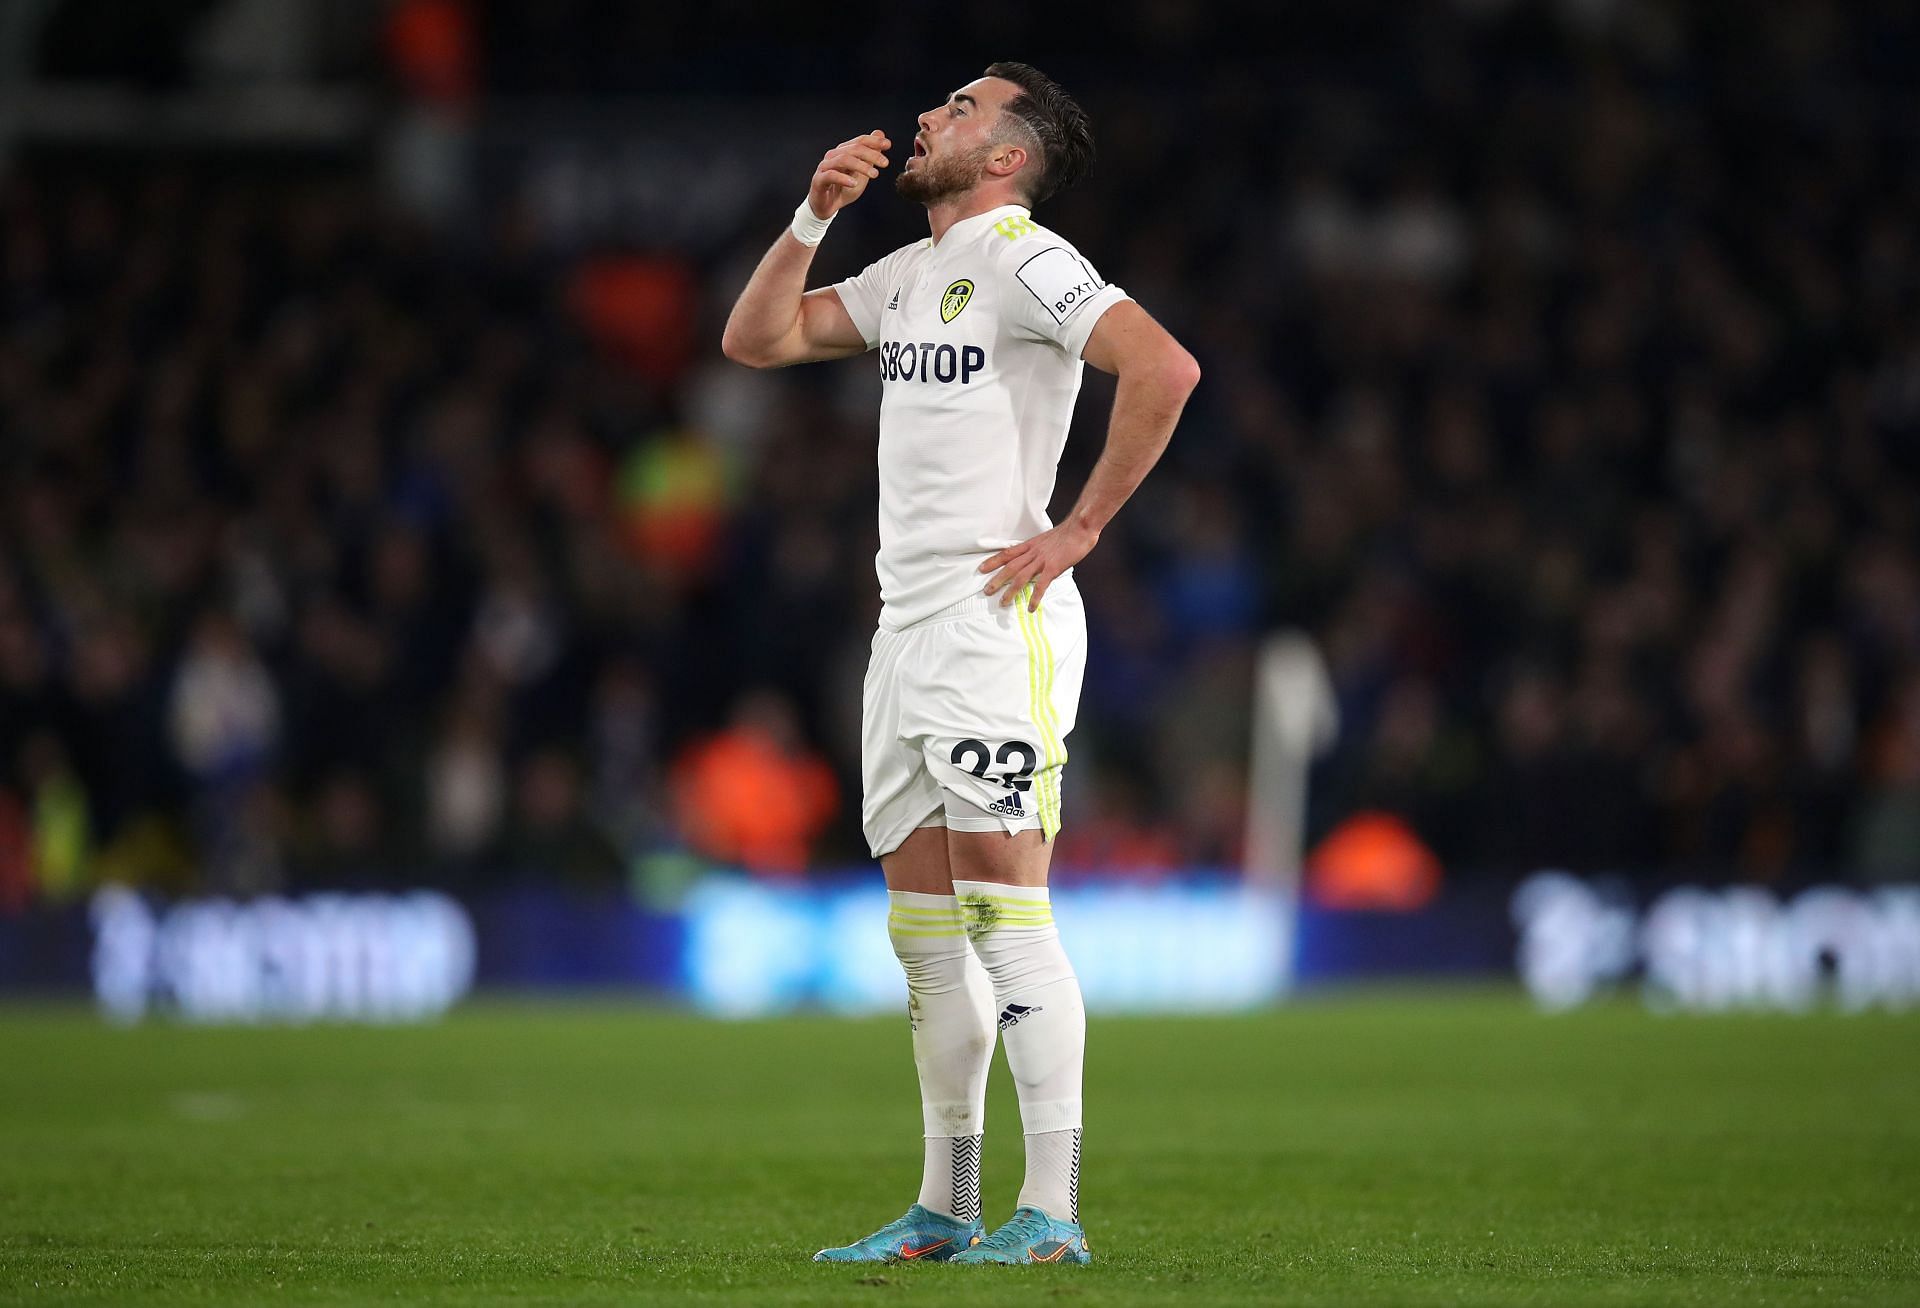 Leeds United look in a great deal of trouble in the Premier League